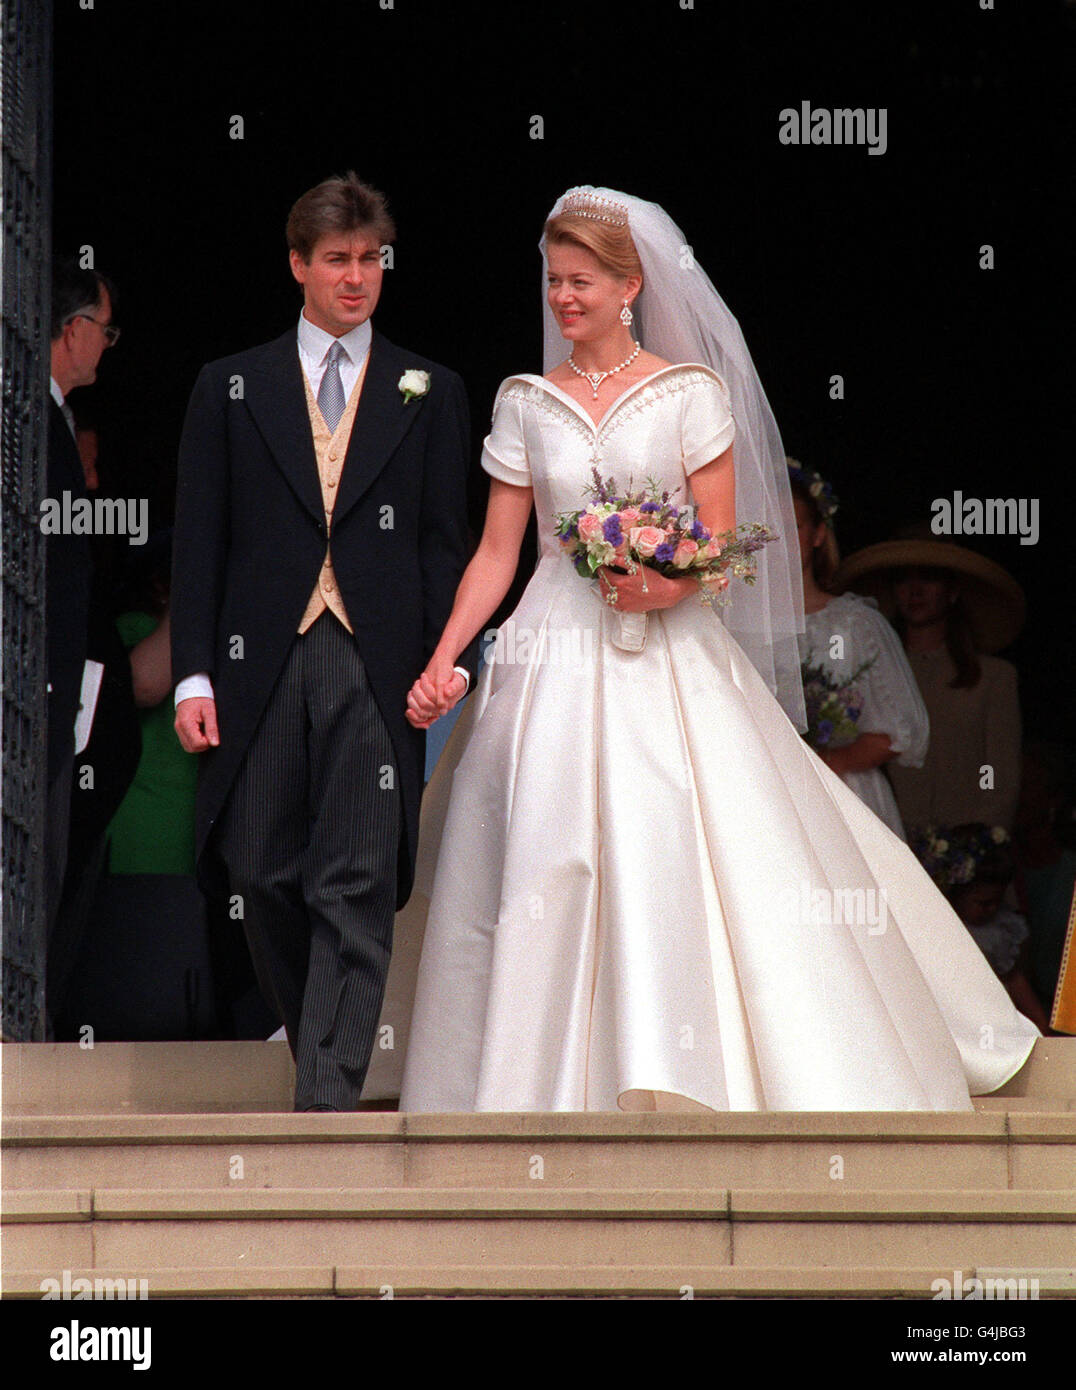 Lady Helen Windsor, daughter of the Duke and Duchess of Kent, and her husband ,Tim Taylor, leaving St George's Chapel in Windsor Castle after their wedding ceremony. Stock Photo